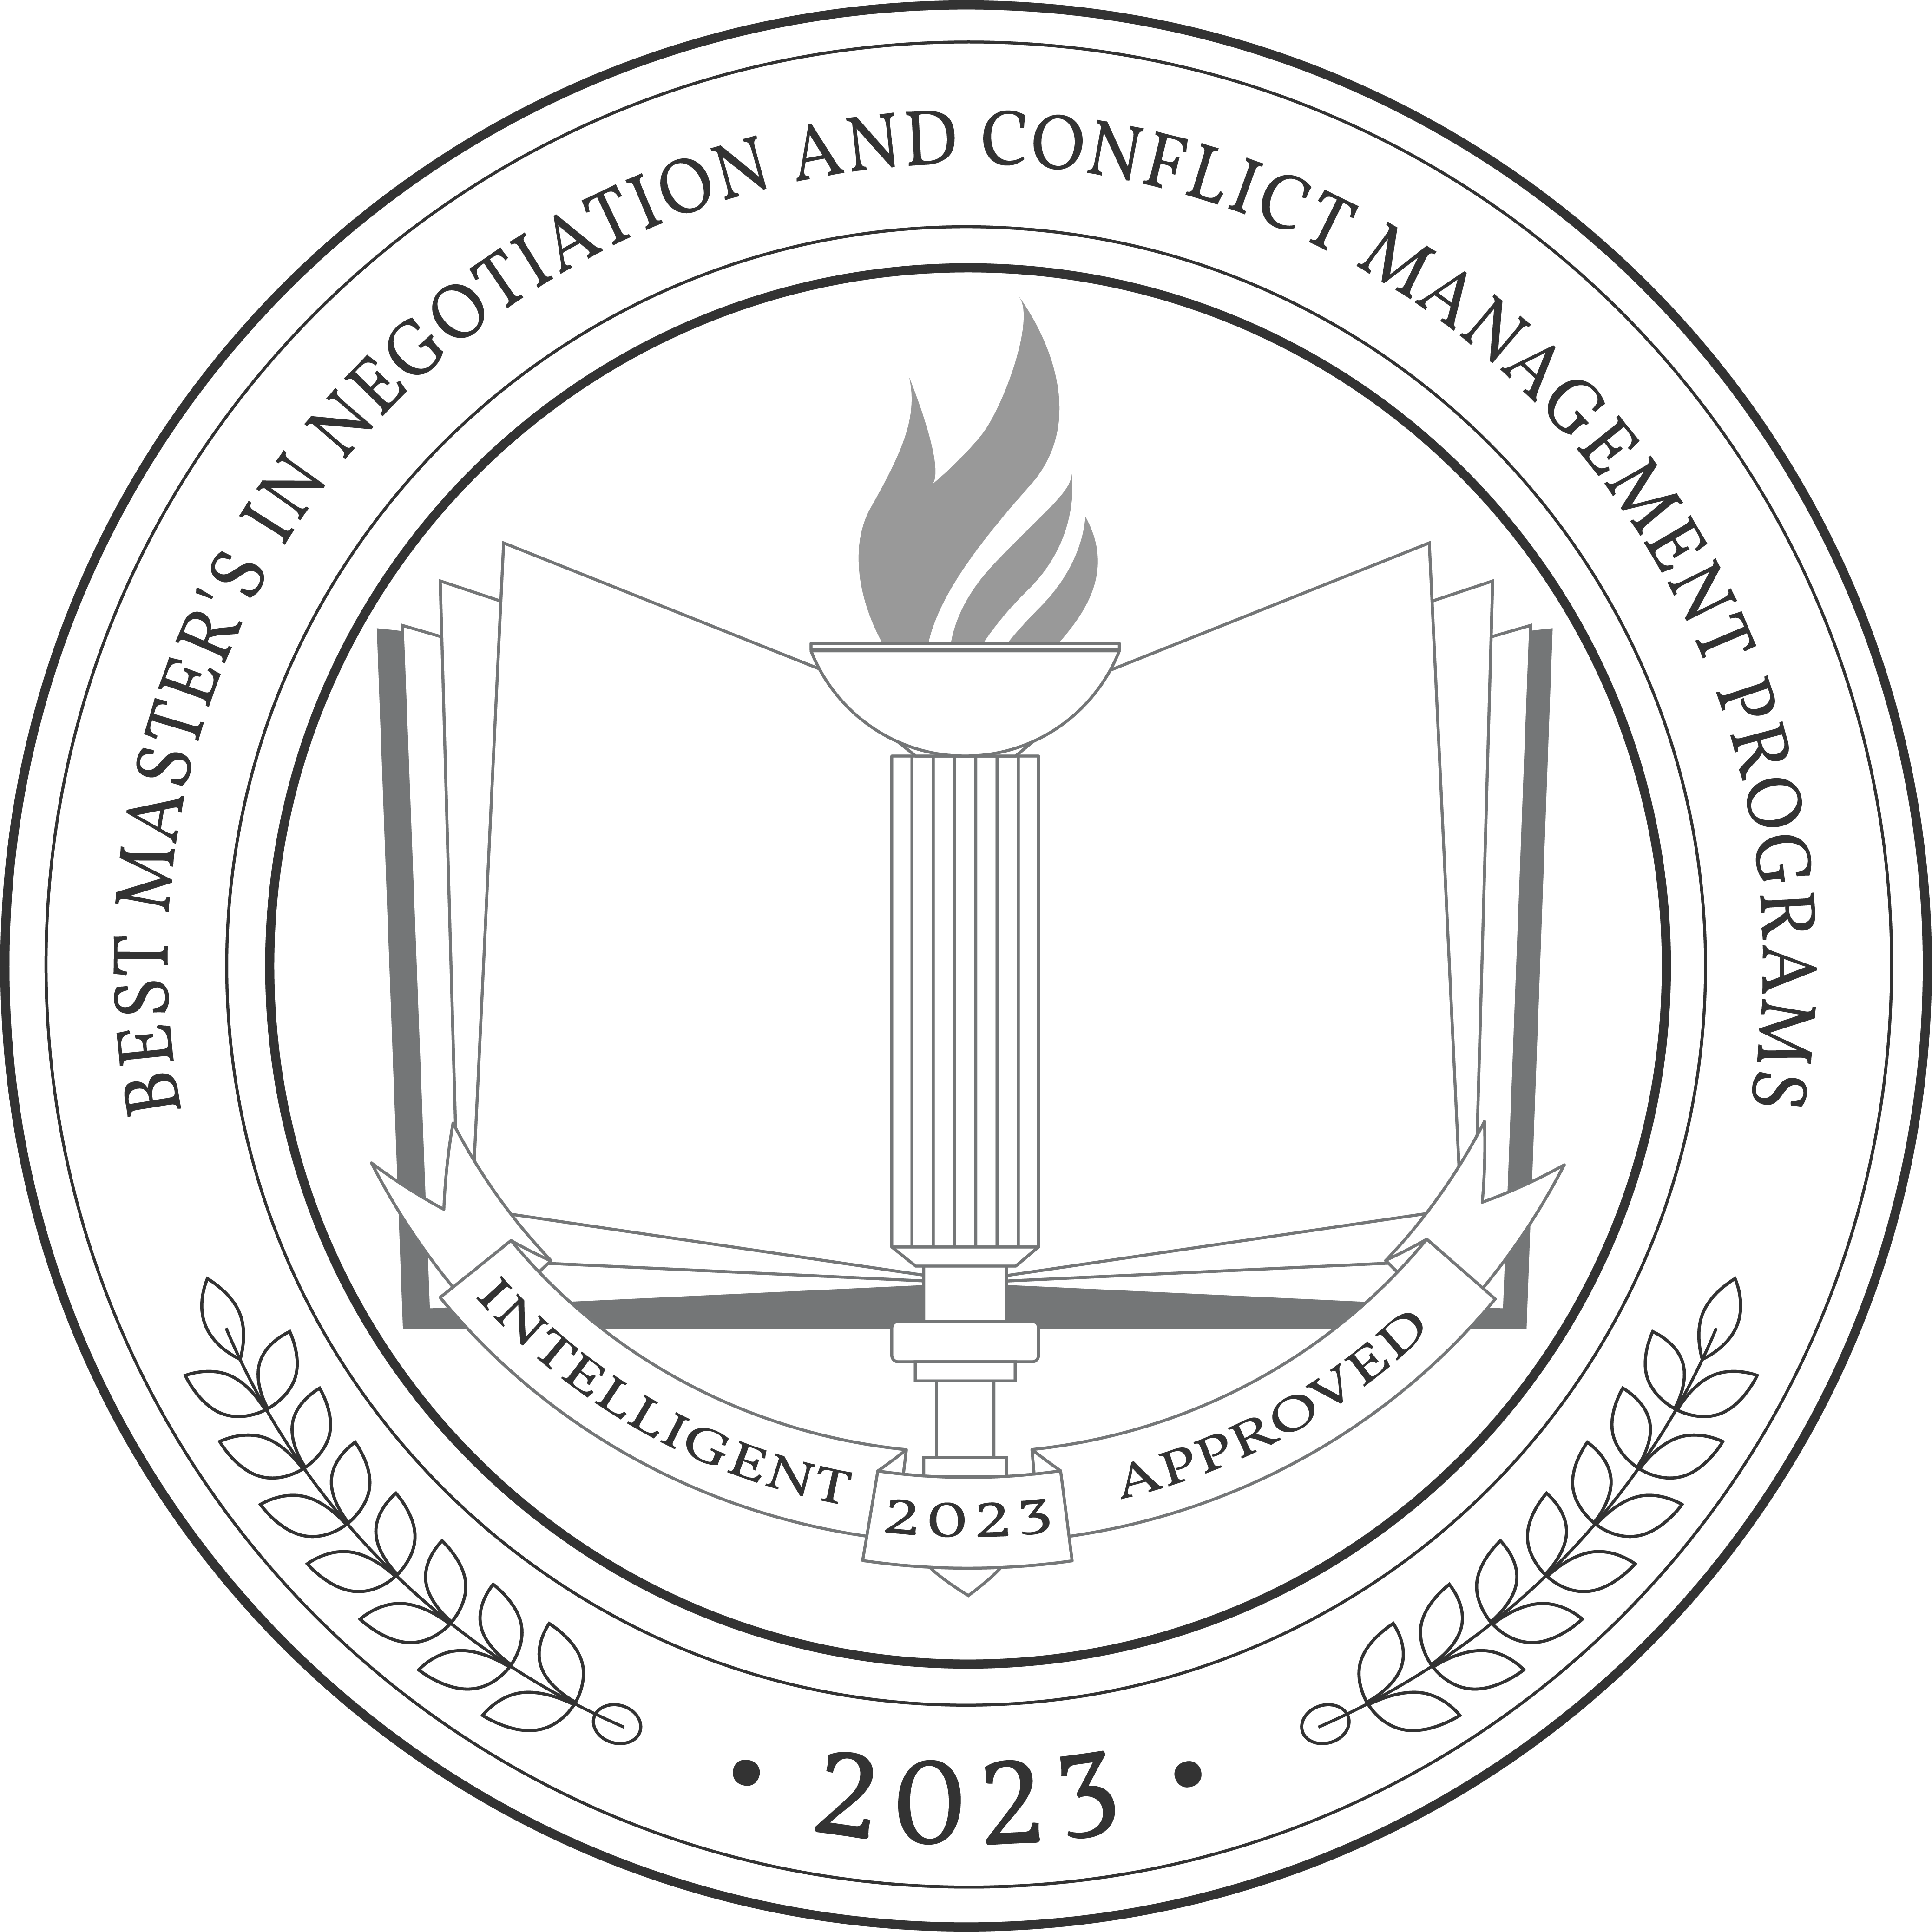 Best Master's in Negotiation And Conflict Management Programs badge